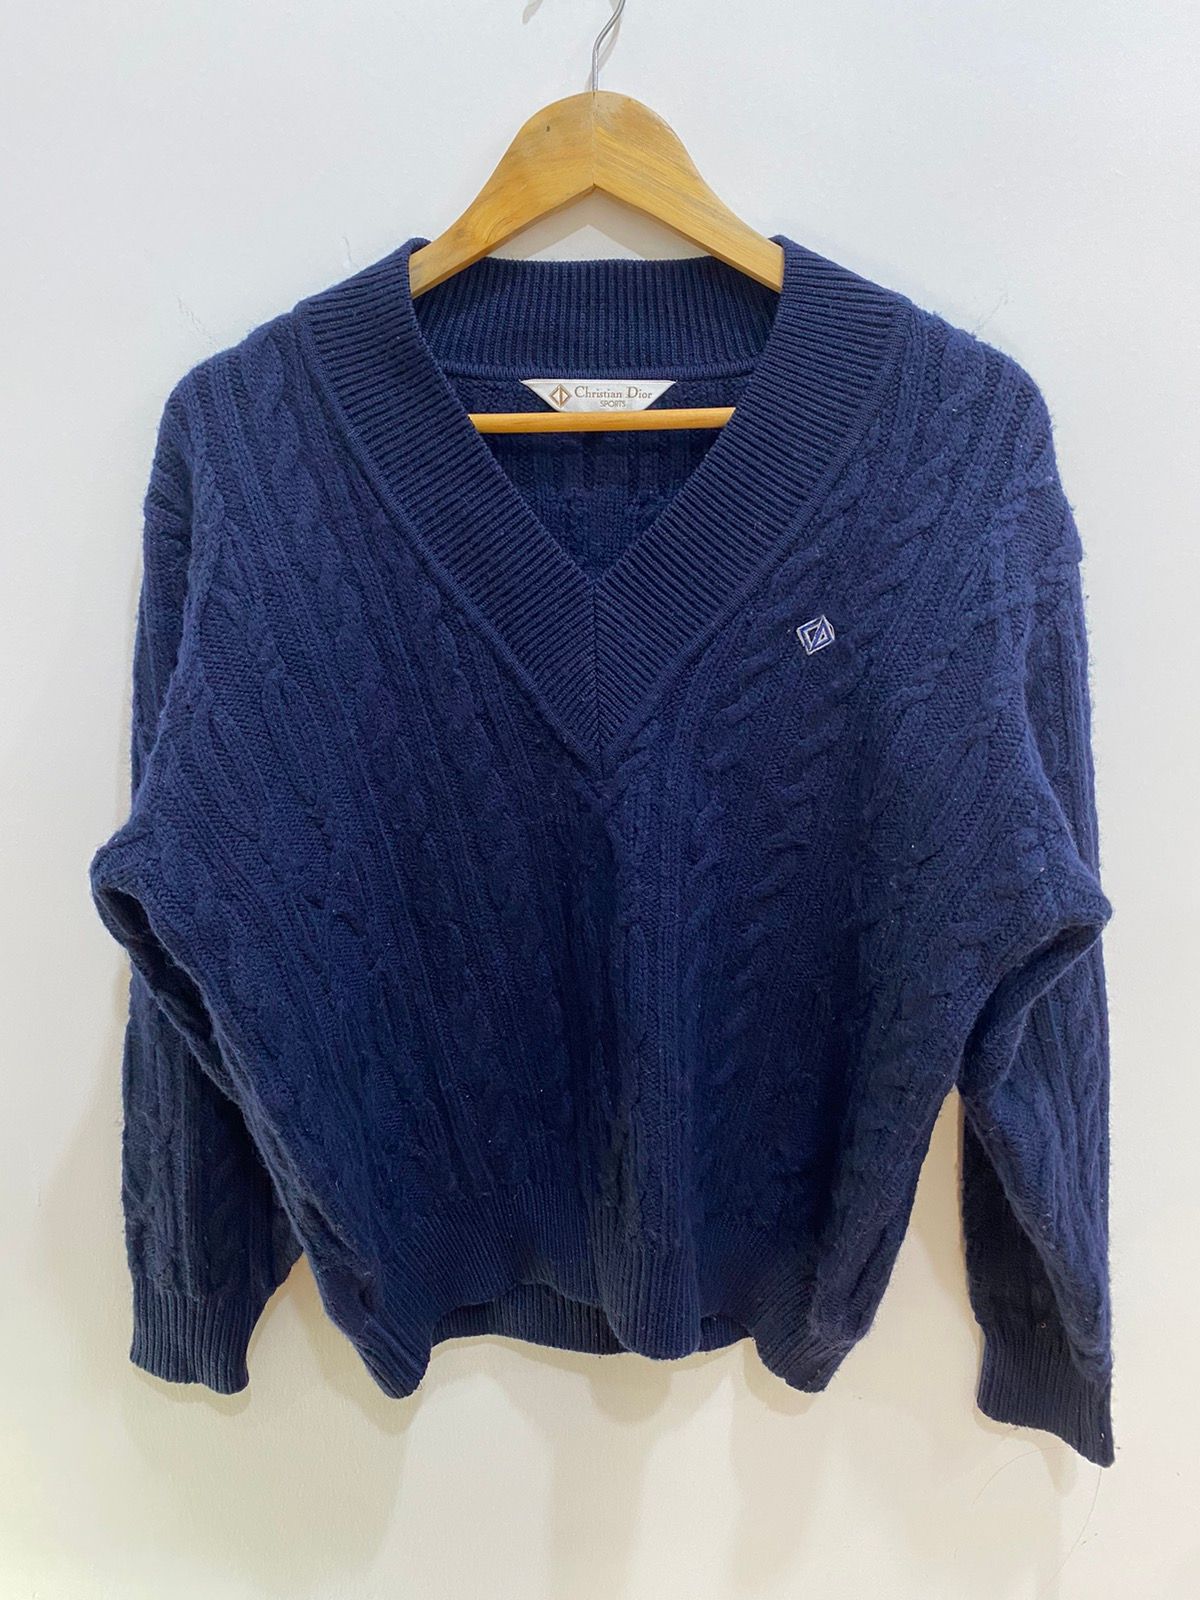 Christian Dior Monsieur - Vintage Christian Dior Sport Cable Knit Sweater